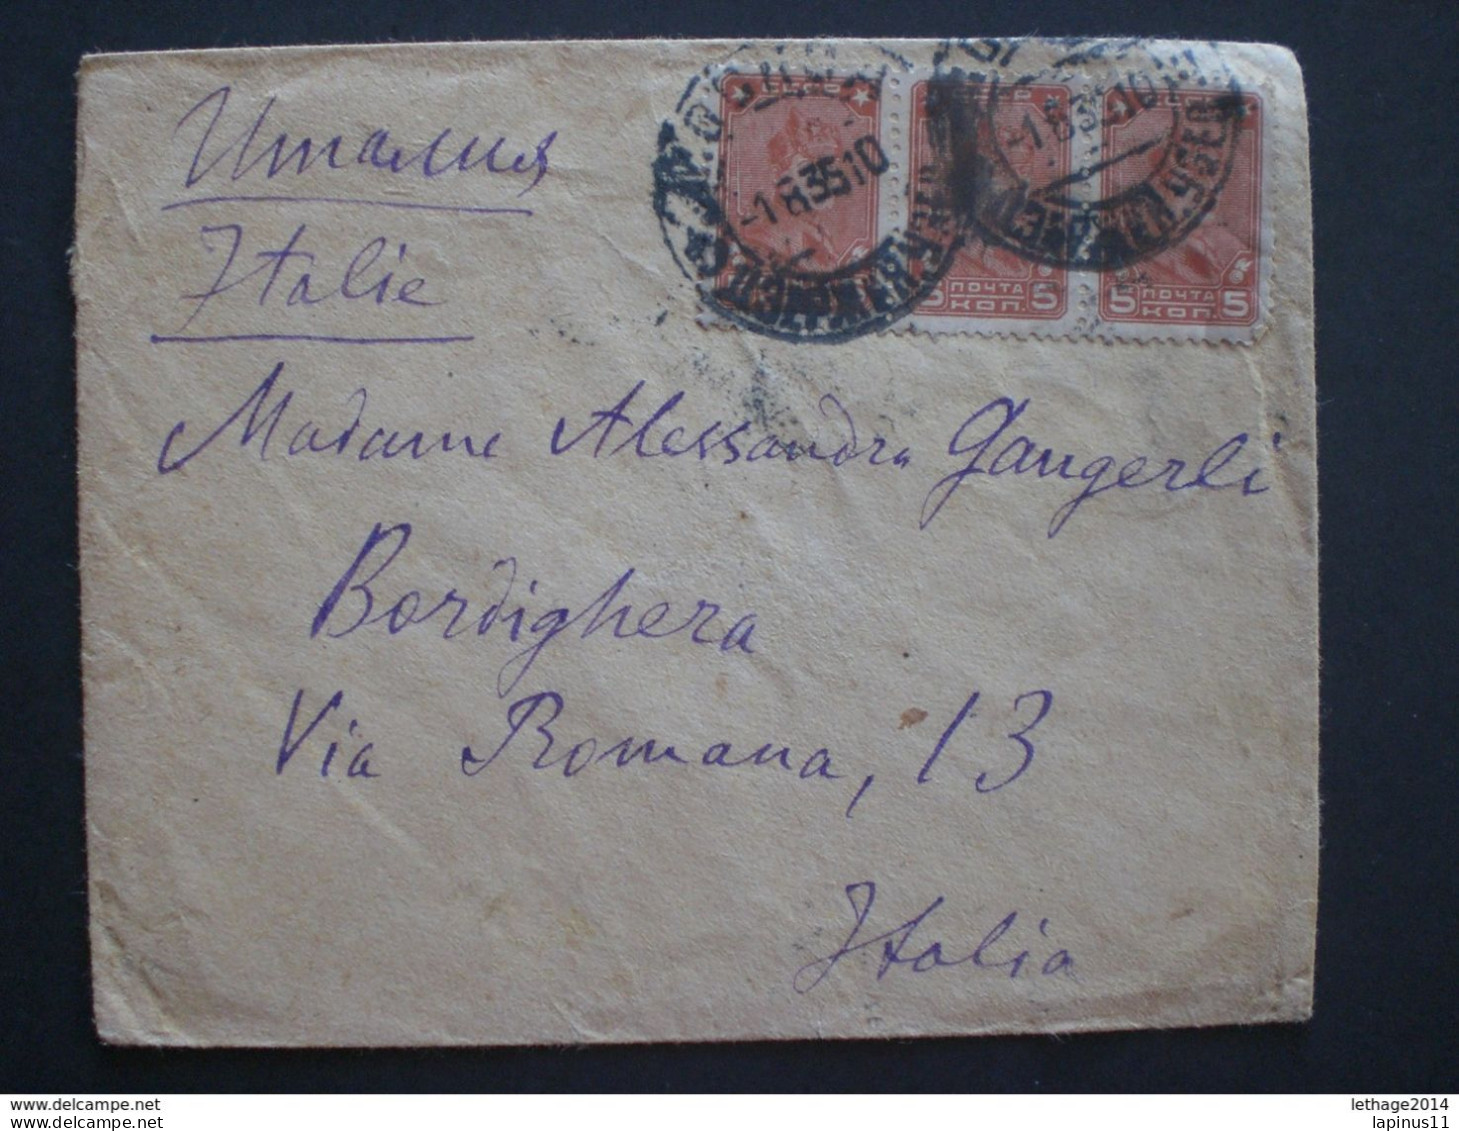 RUSSIA RUSSIE РОССИЯ STAMPS COVER 1935 Registered Mail RUSSIE TO ITALY RRR RIF.TAGG. (11) - Storia Postale